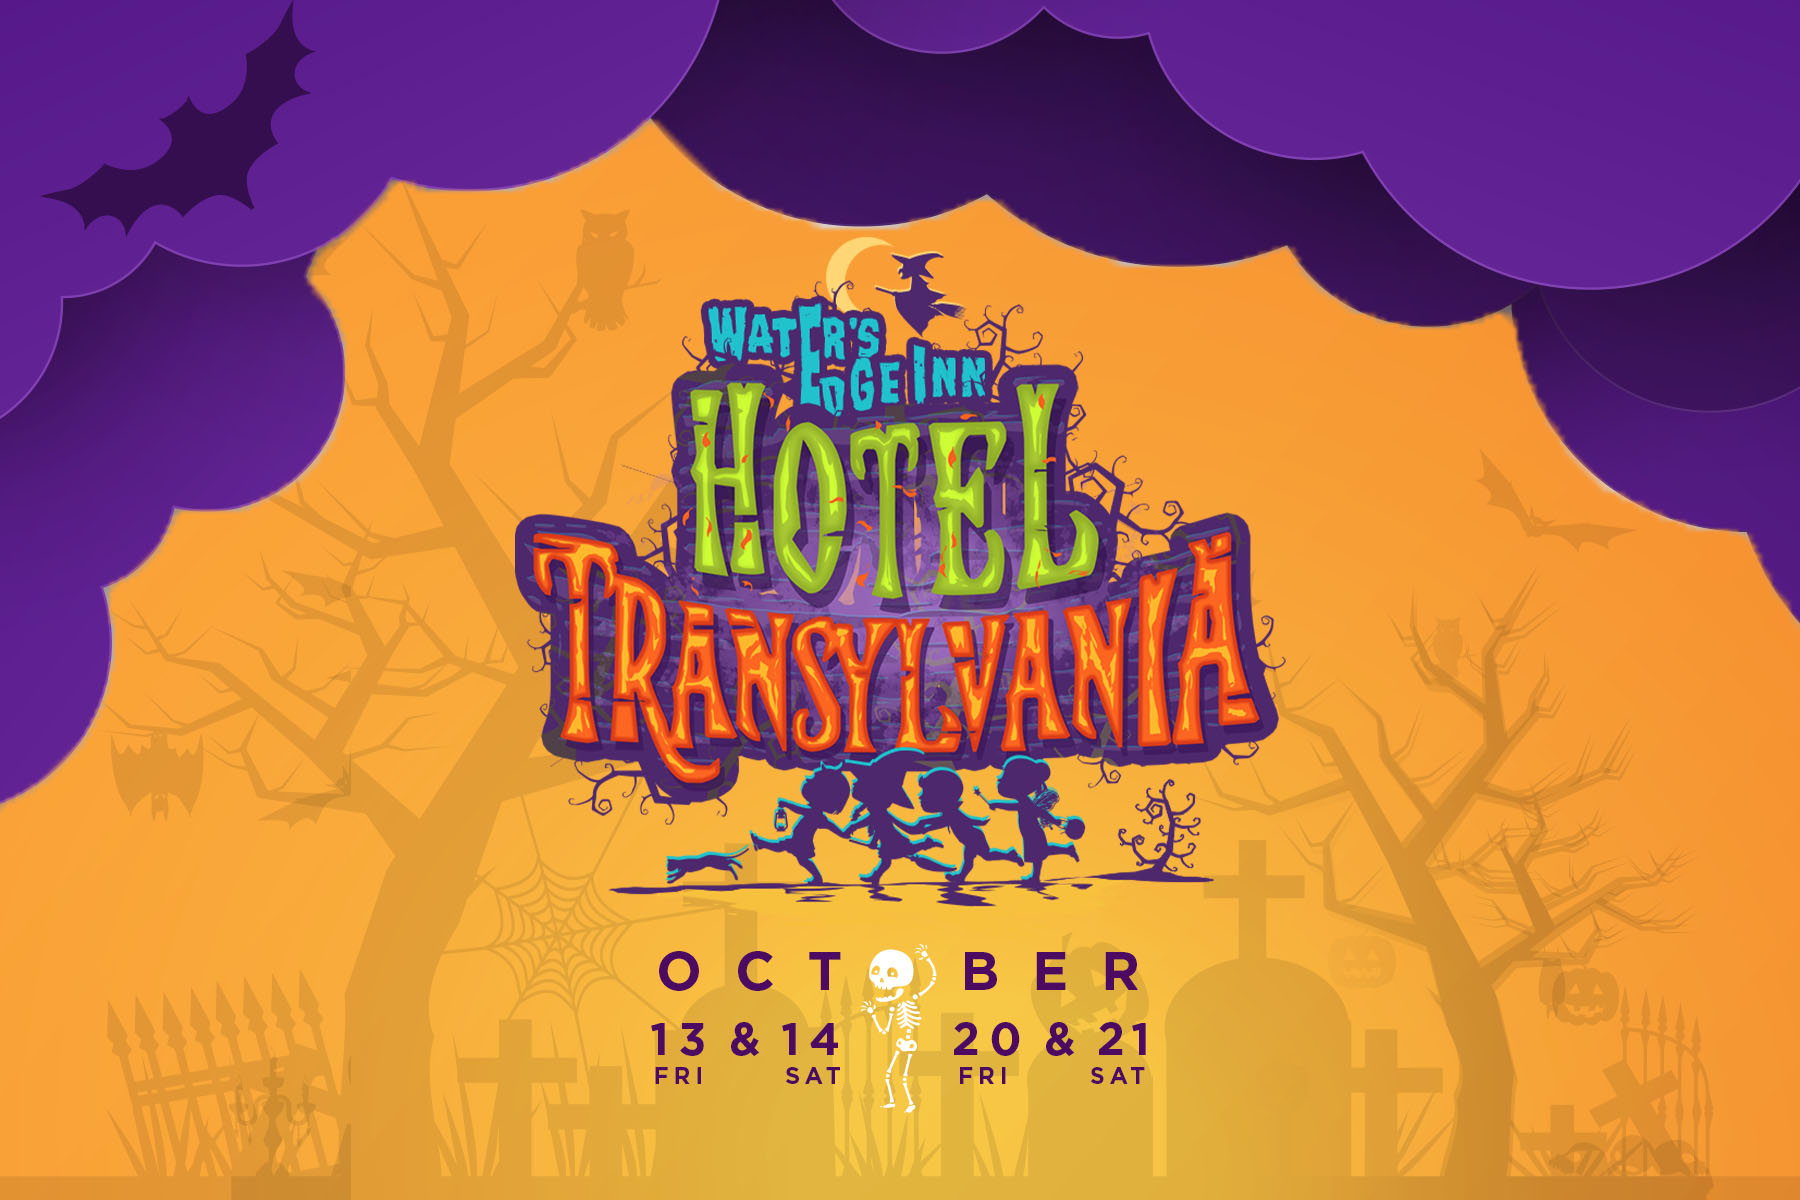 Hotel Transylvania Weekends at Water’s Edge Inn in Old Forge, NY